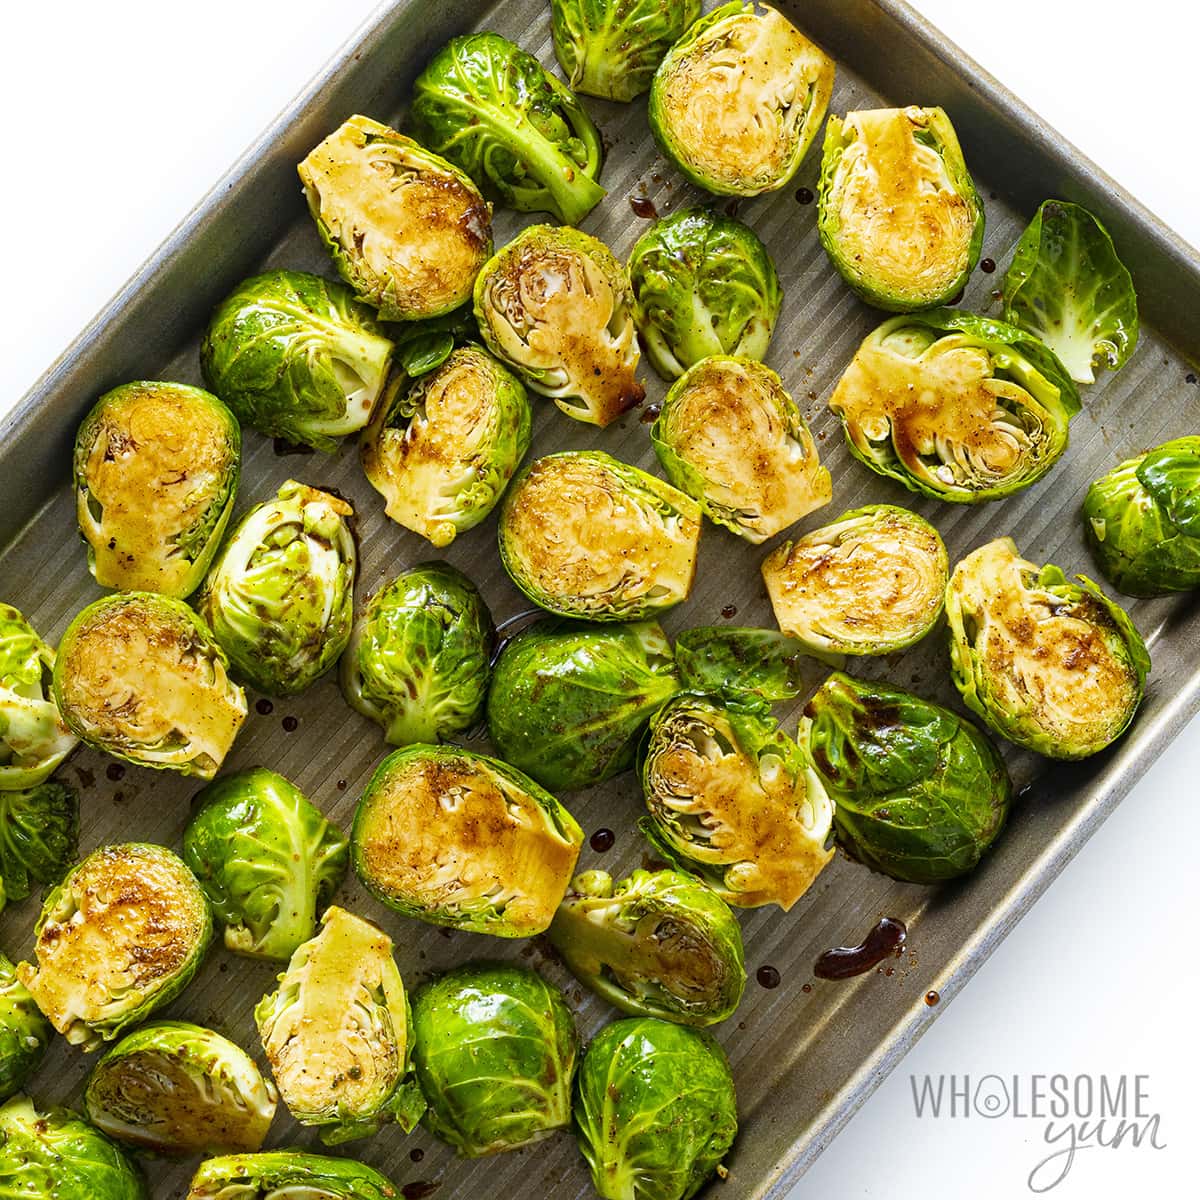 Raw brussels sprouts arranged in a single layer on a baking sheet.